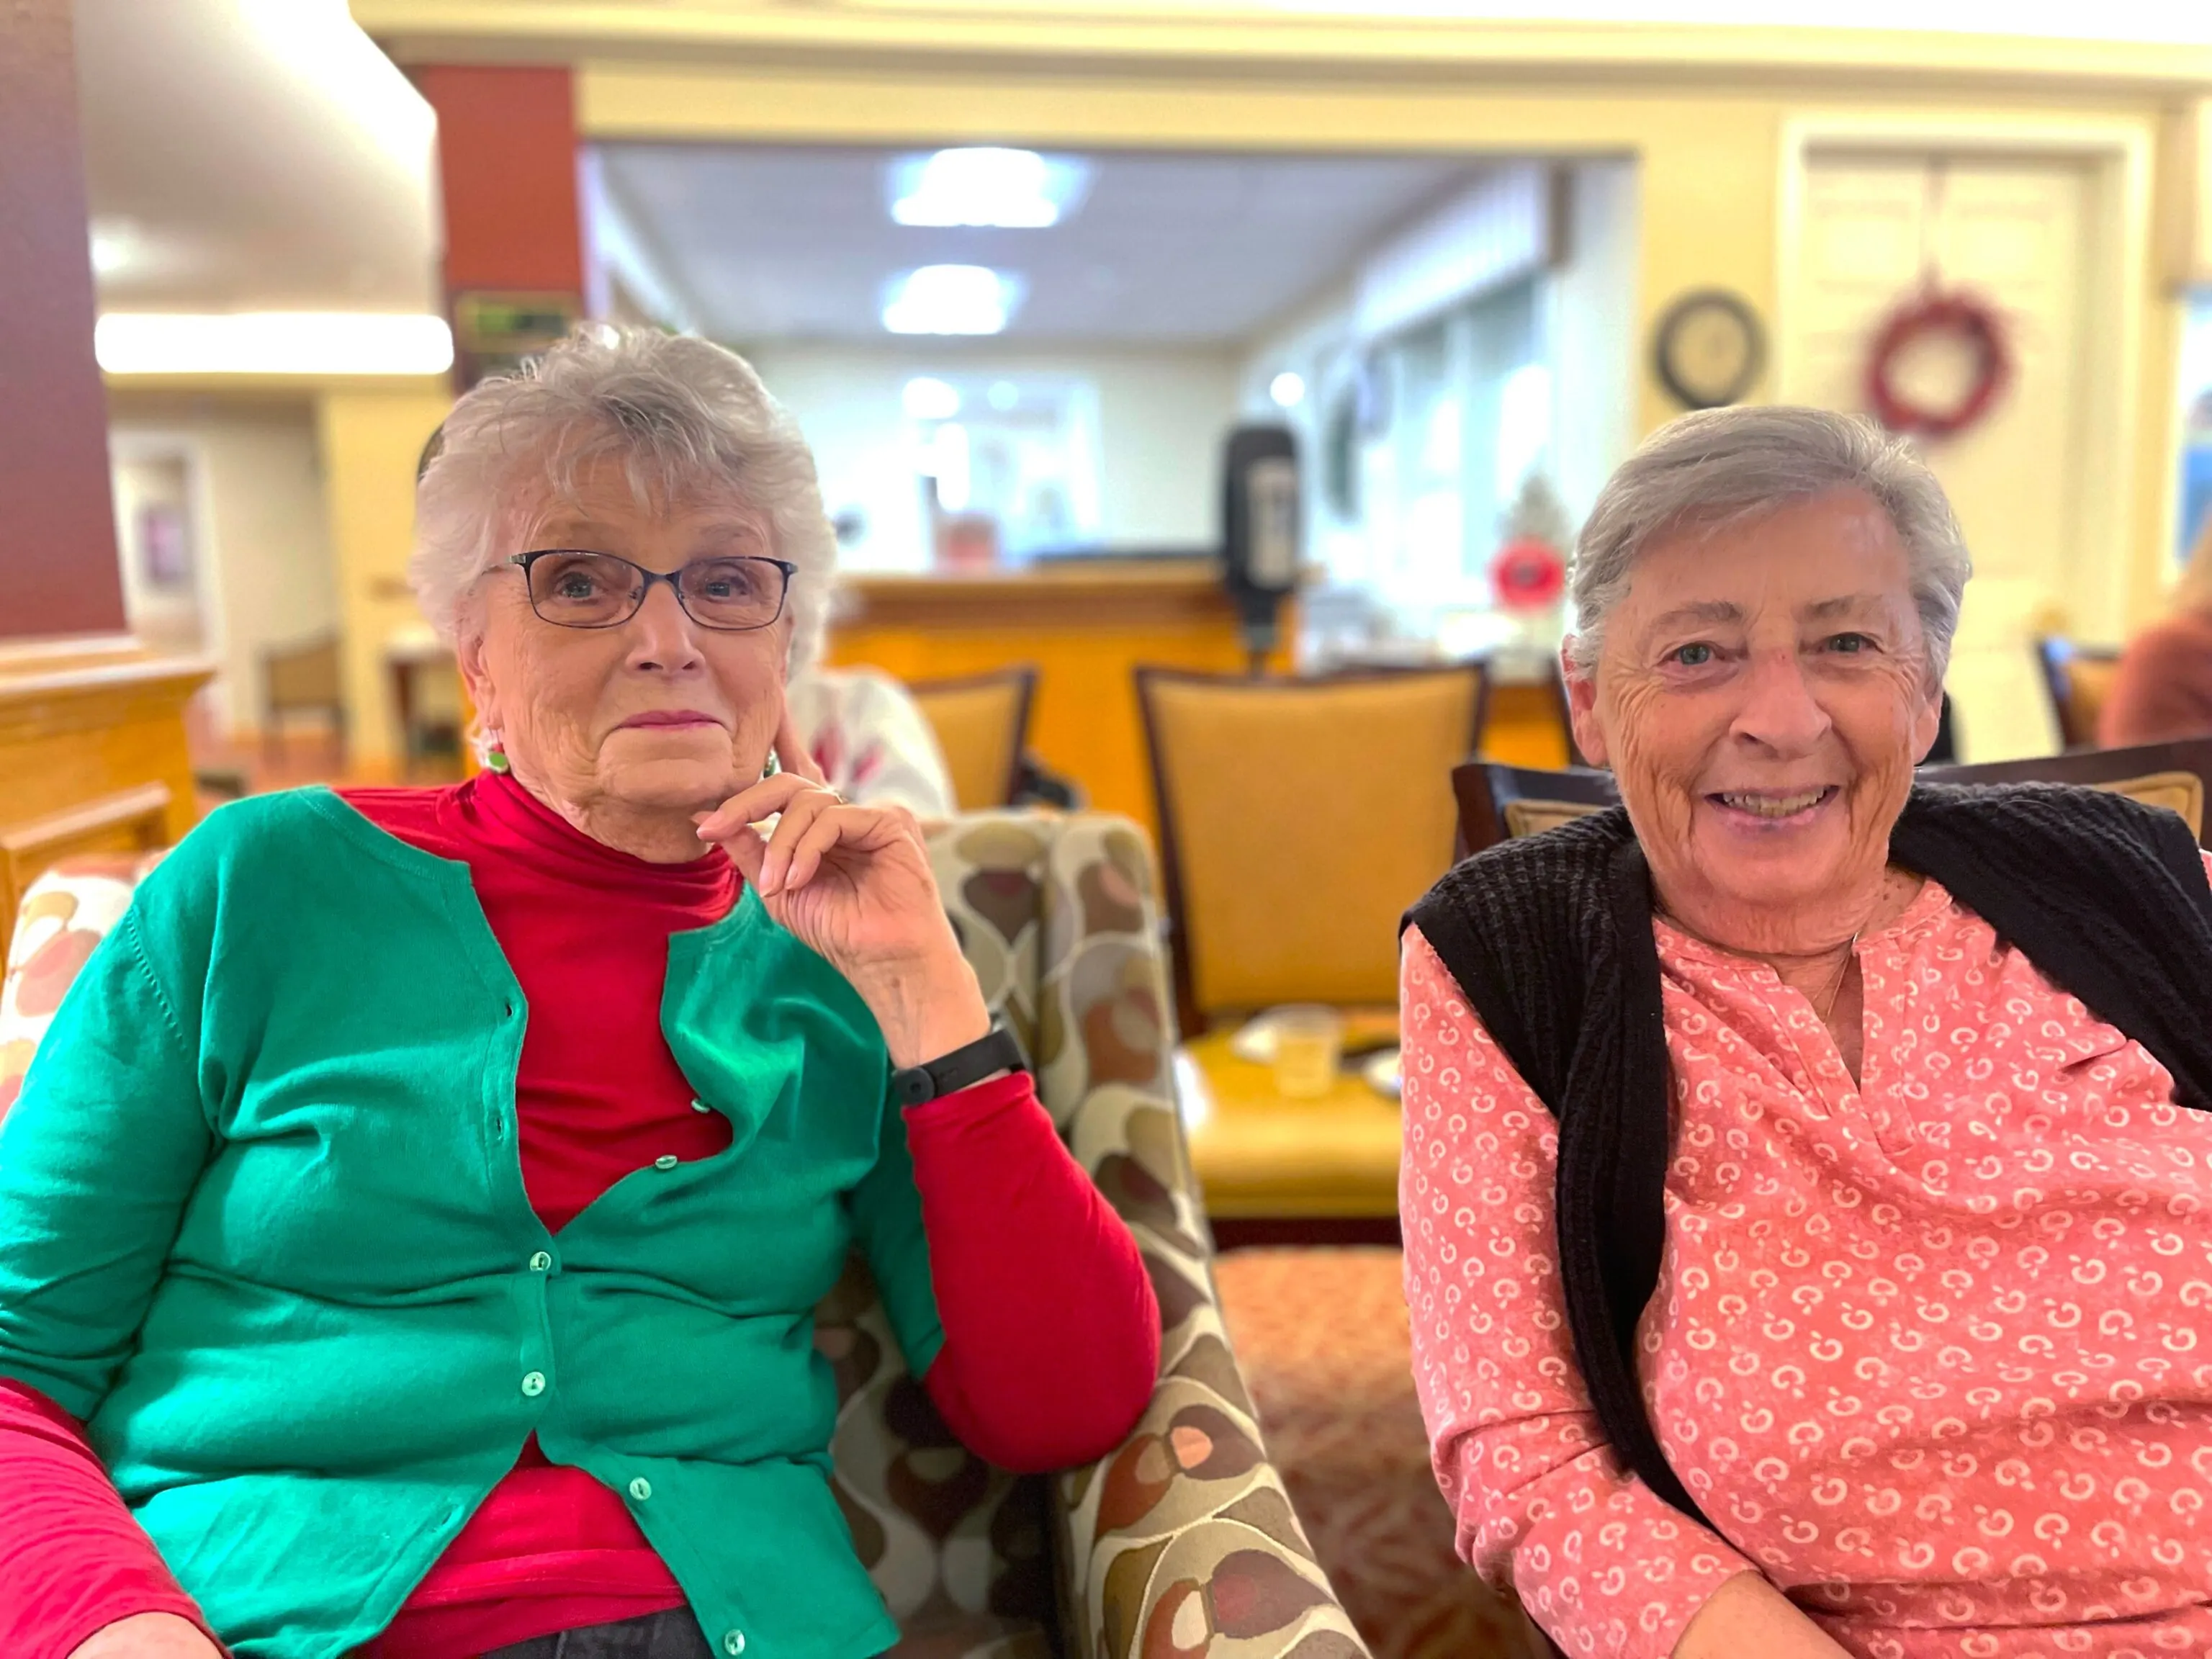 PHOTO: Joan Harris, left, and Mary Grace Tassone are pictured at Atria Senior Living in Grass Valley, California.